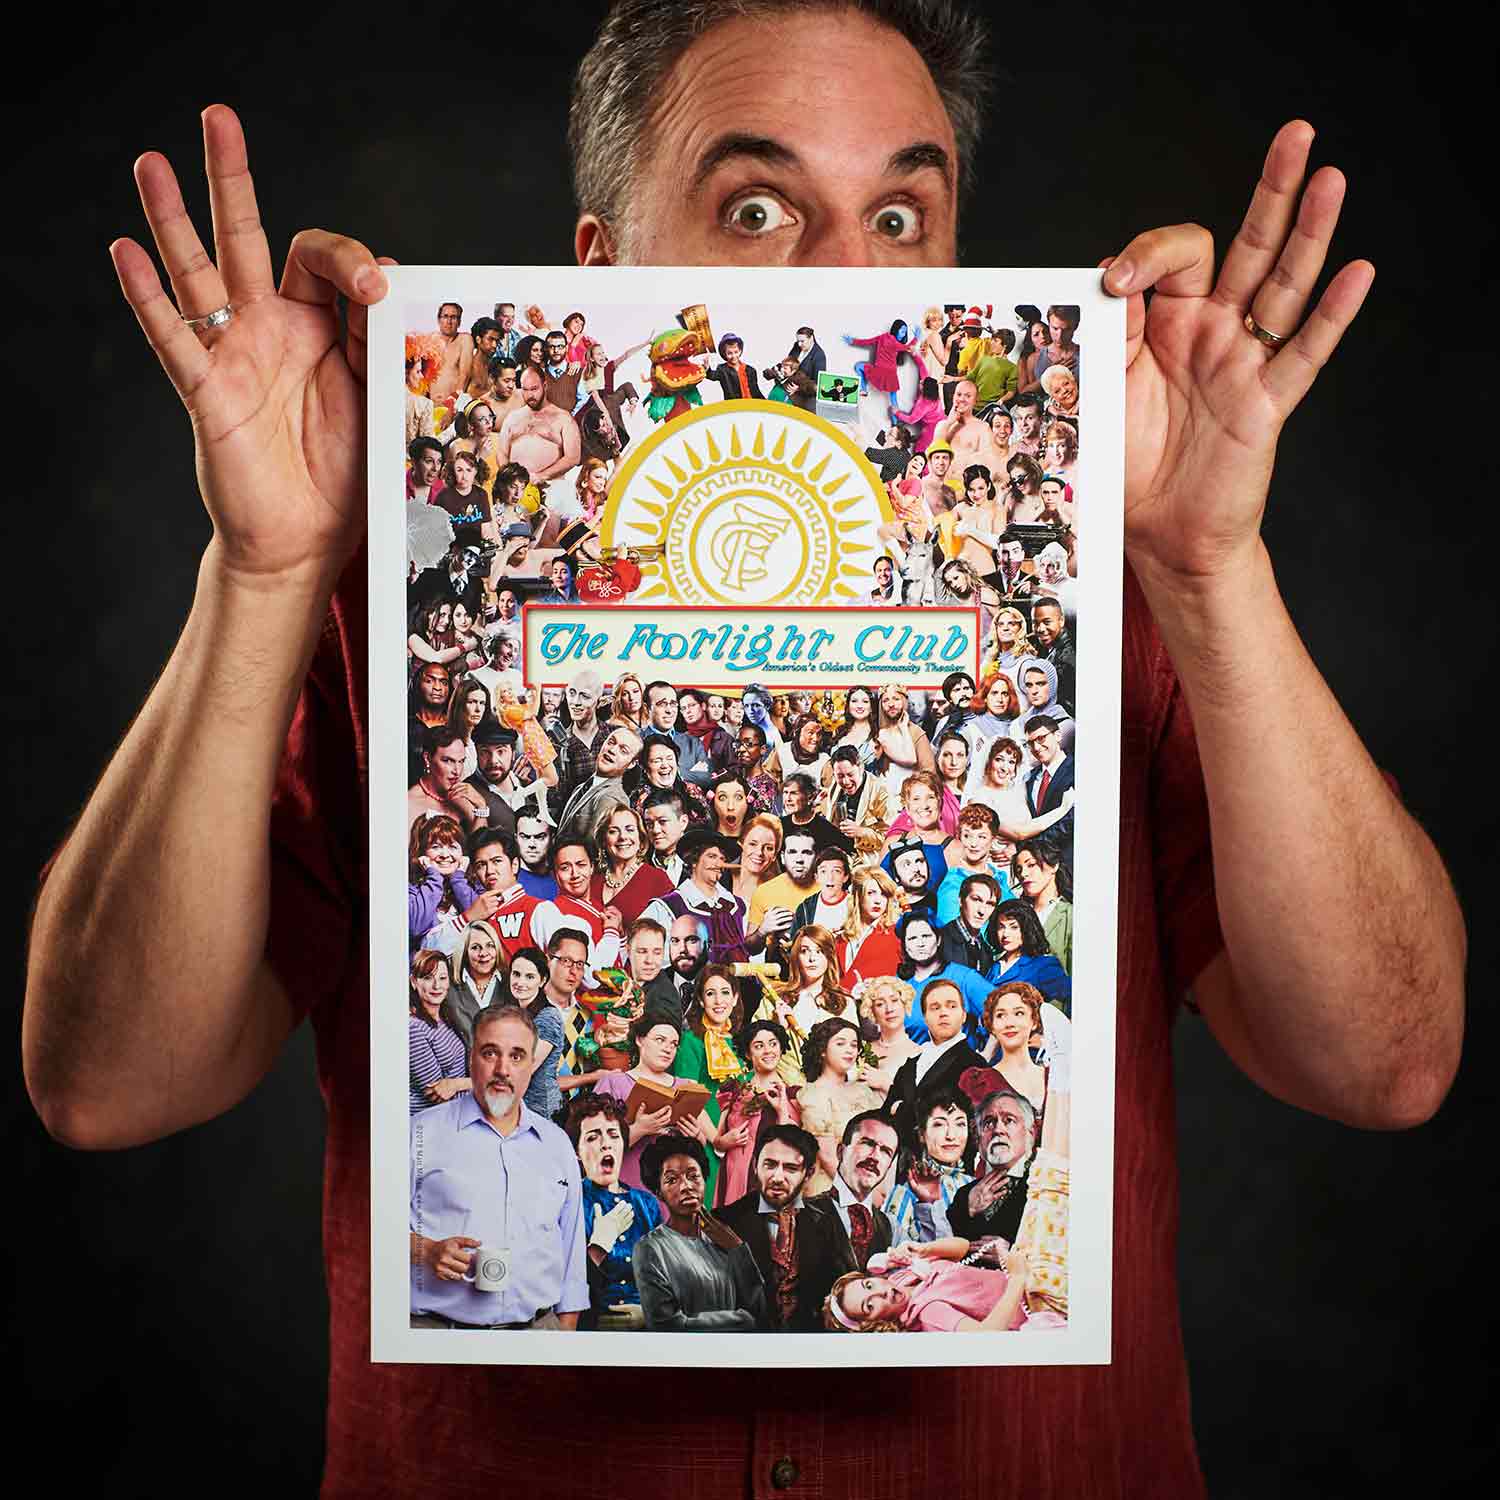 Limited edition poster featuring over 110 cast members, photographed since 2003, for the Footlight Club. Proceeds from the sale of this poster will be donated to the Footlight Club Tech Fund